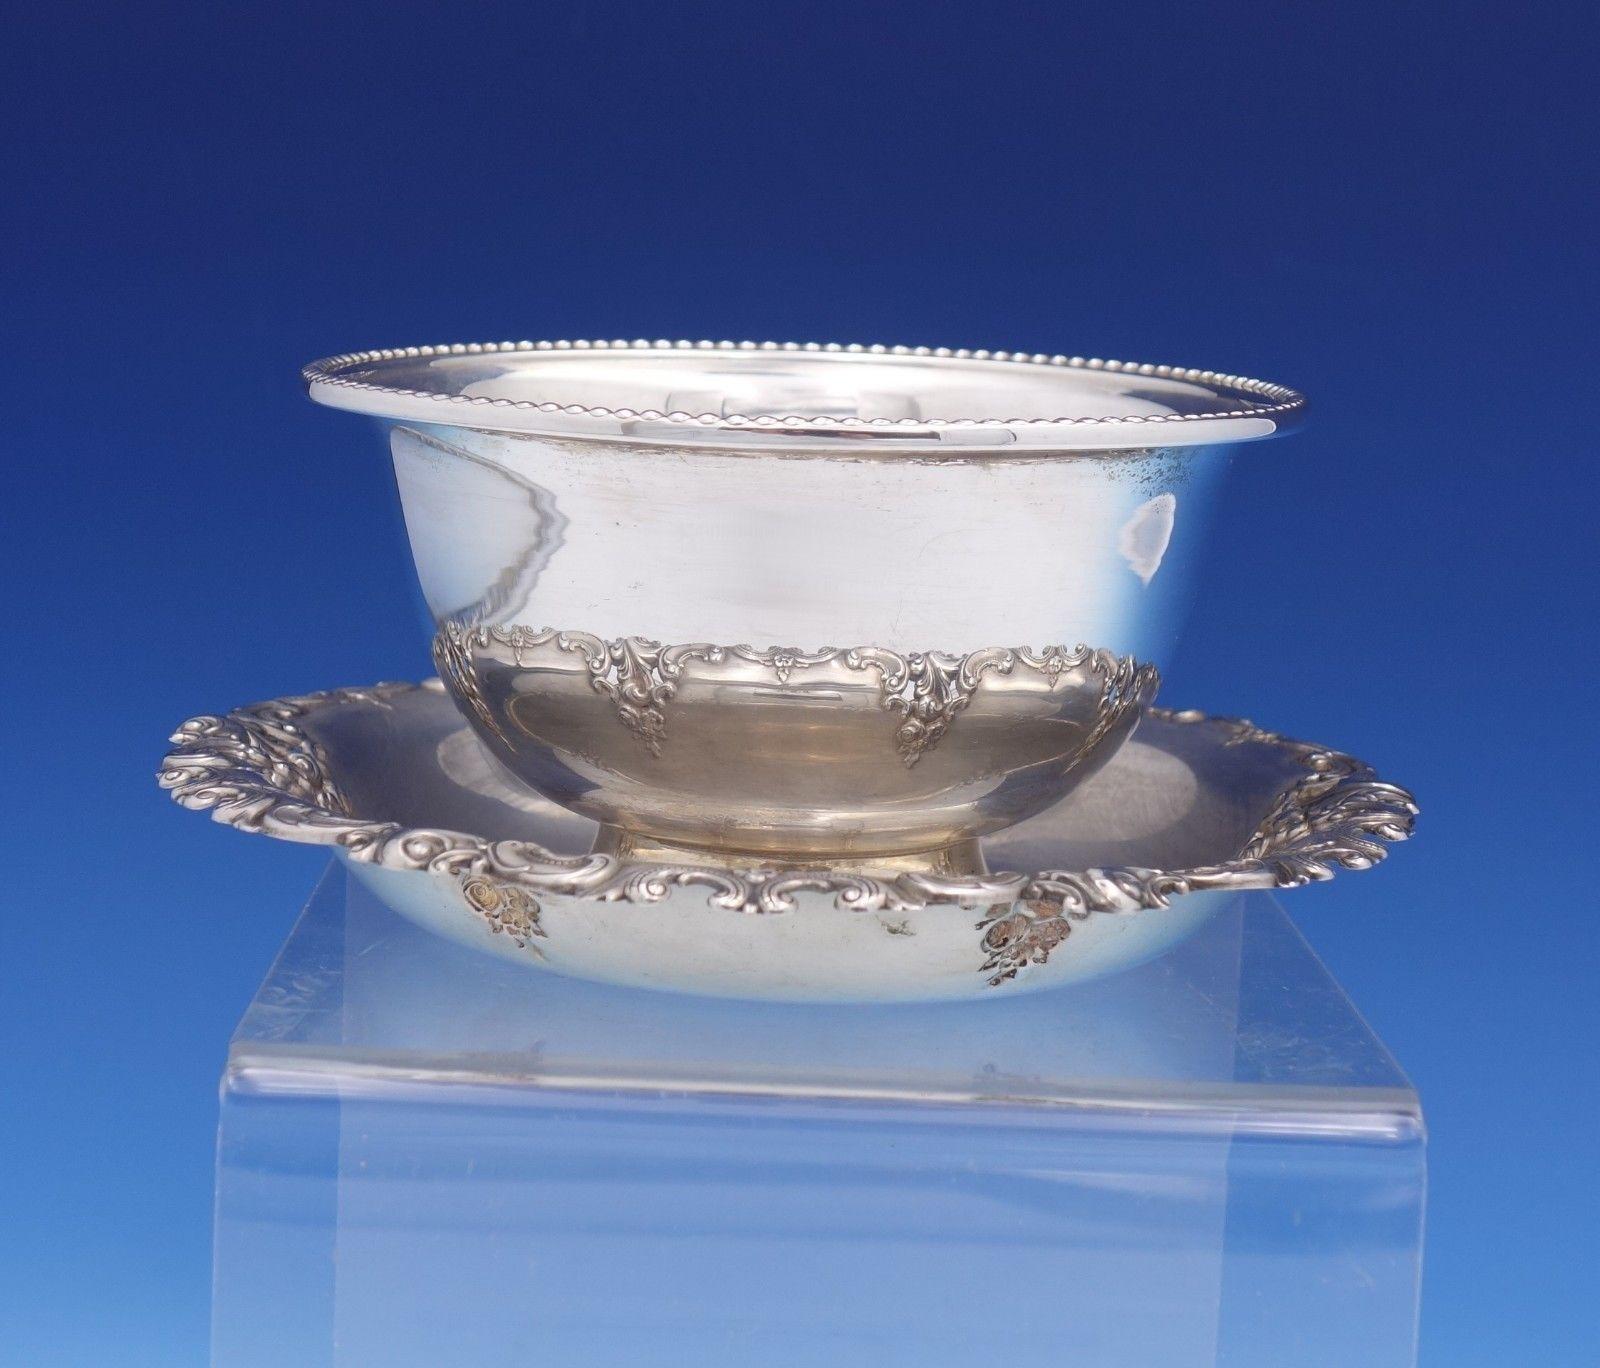 Beautiful Grande baroque by Wallace sterling silver gravy boat marked #4995. This gravy boat measures 3 x 6 in diameter and weighs 7.0 troy ounces. It is not monogrammed and is in excellent condition. Wonderful!



 